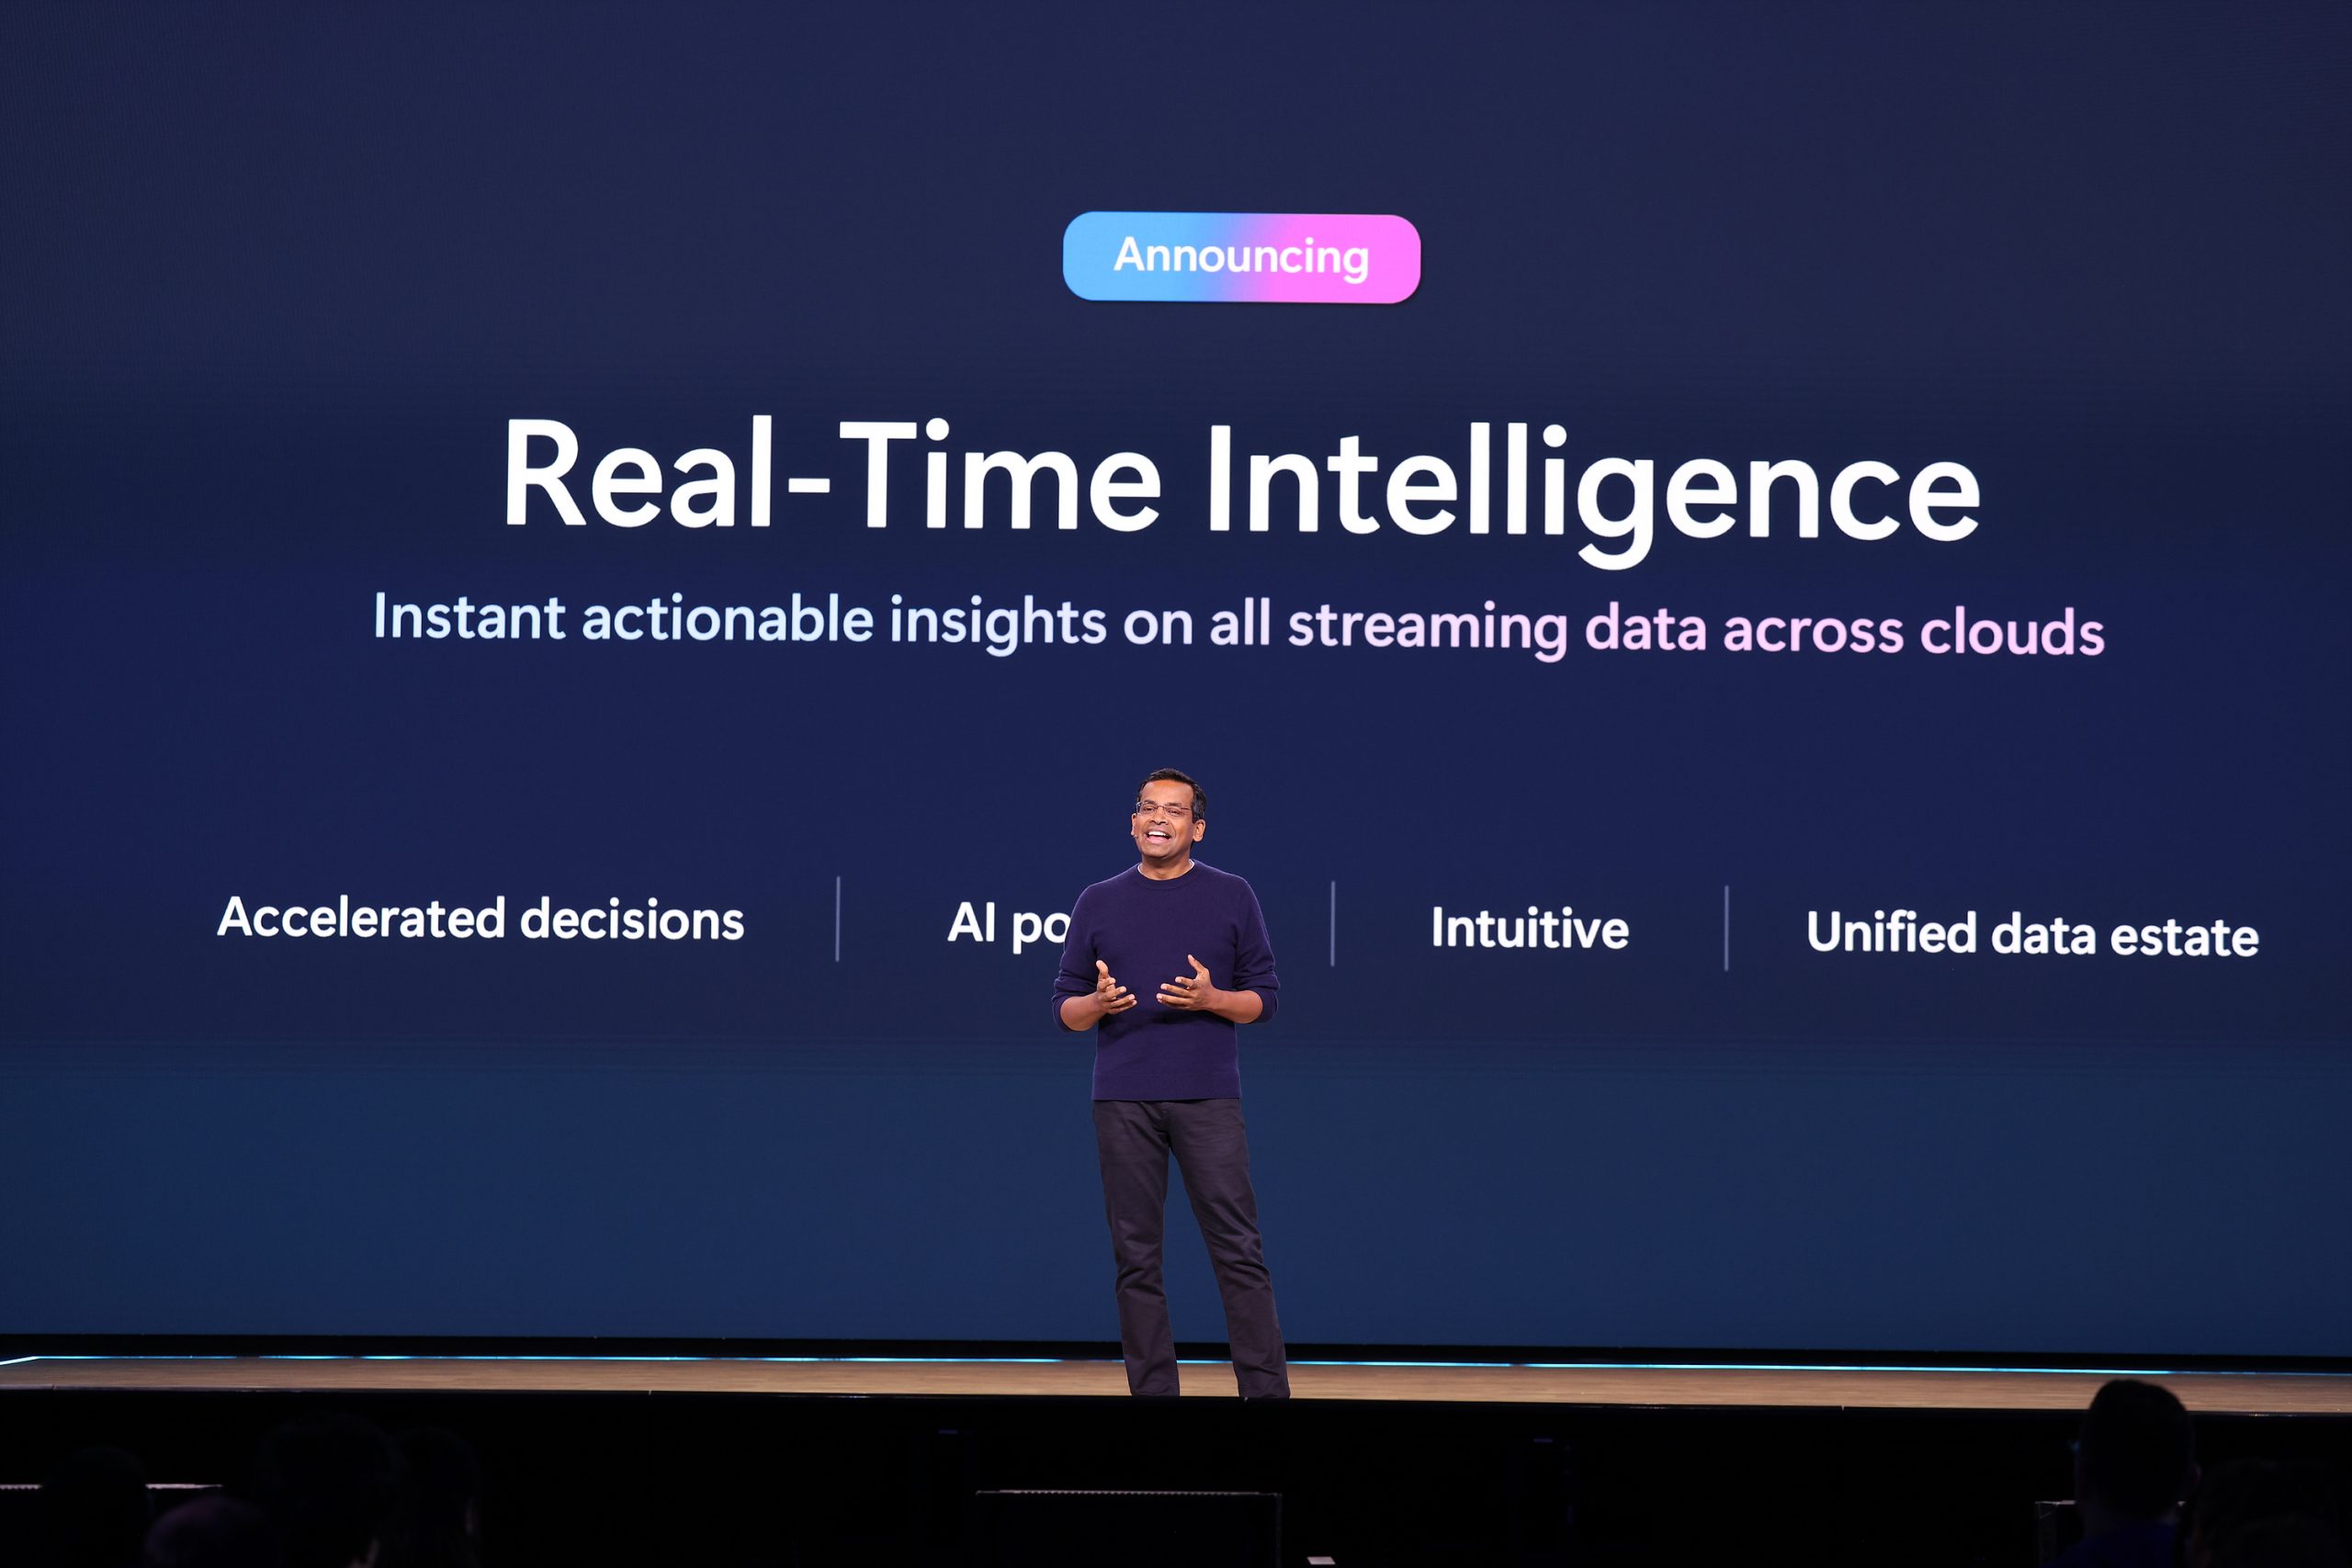 A man standing on stage speaking to an audience and gesturing with his hands, with text on the screen behind him about Real-Time Intelligence